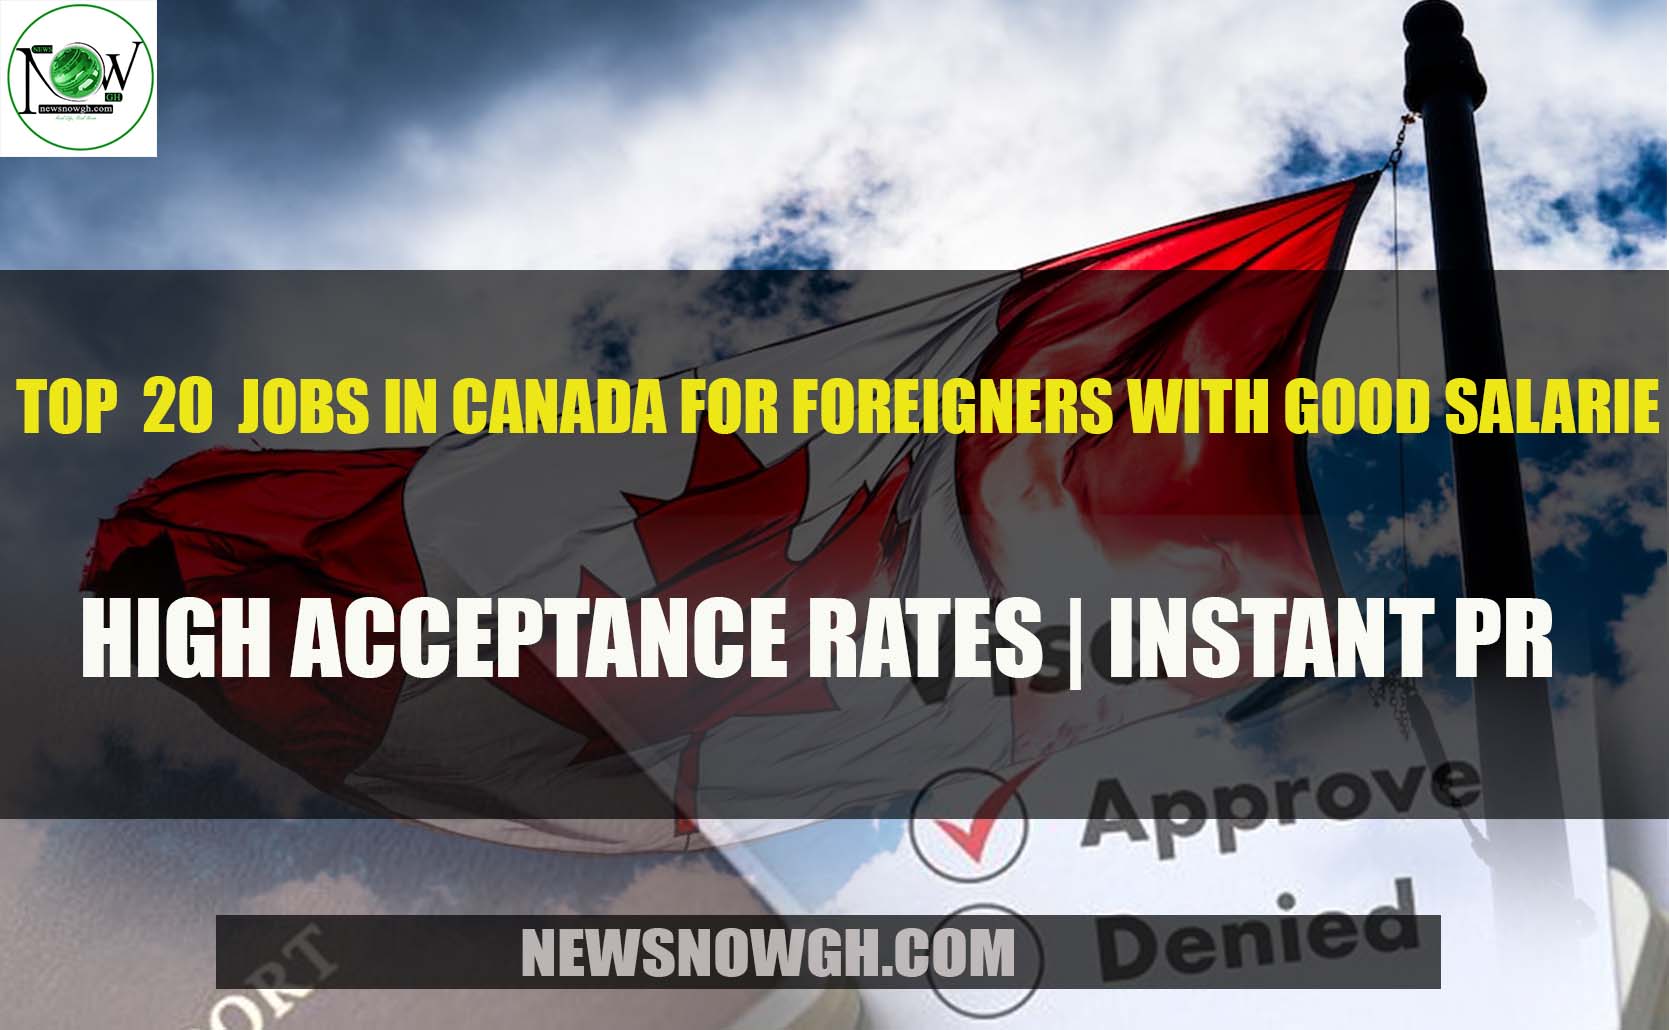 Top 20 Jobs in Canada for Foreigners with Good Salaries | High Acceptance Rates | Instant PR